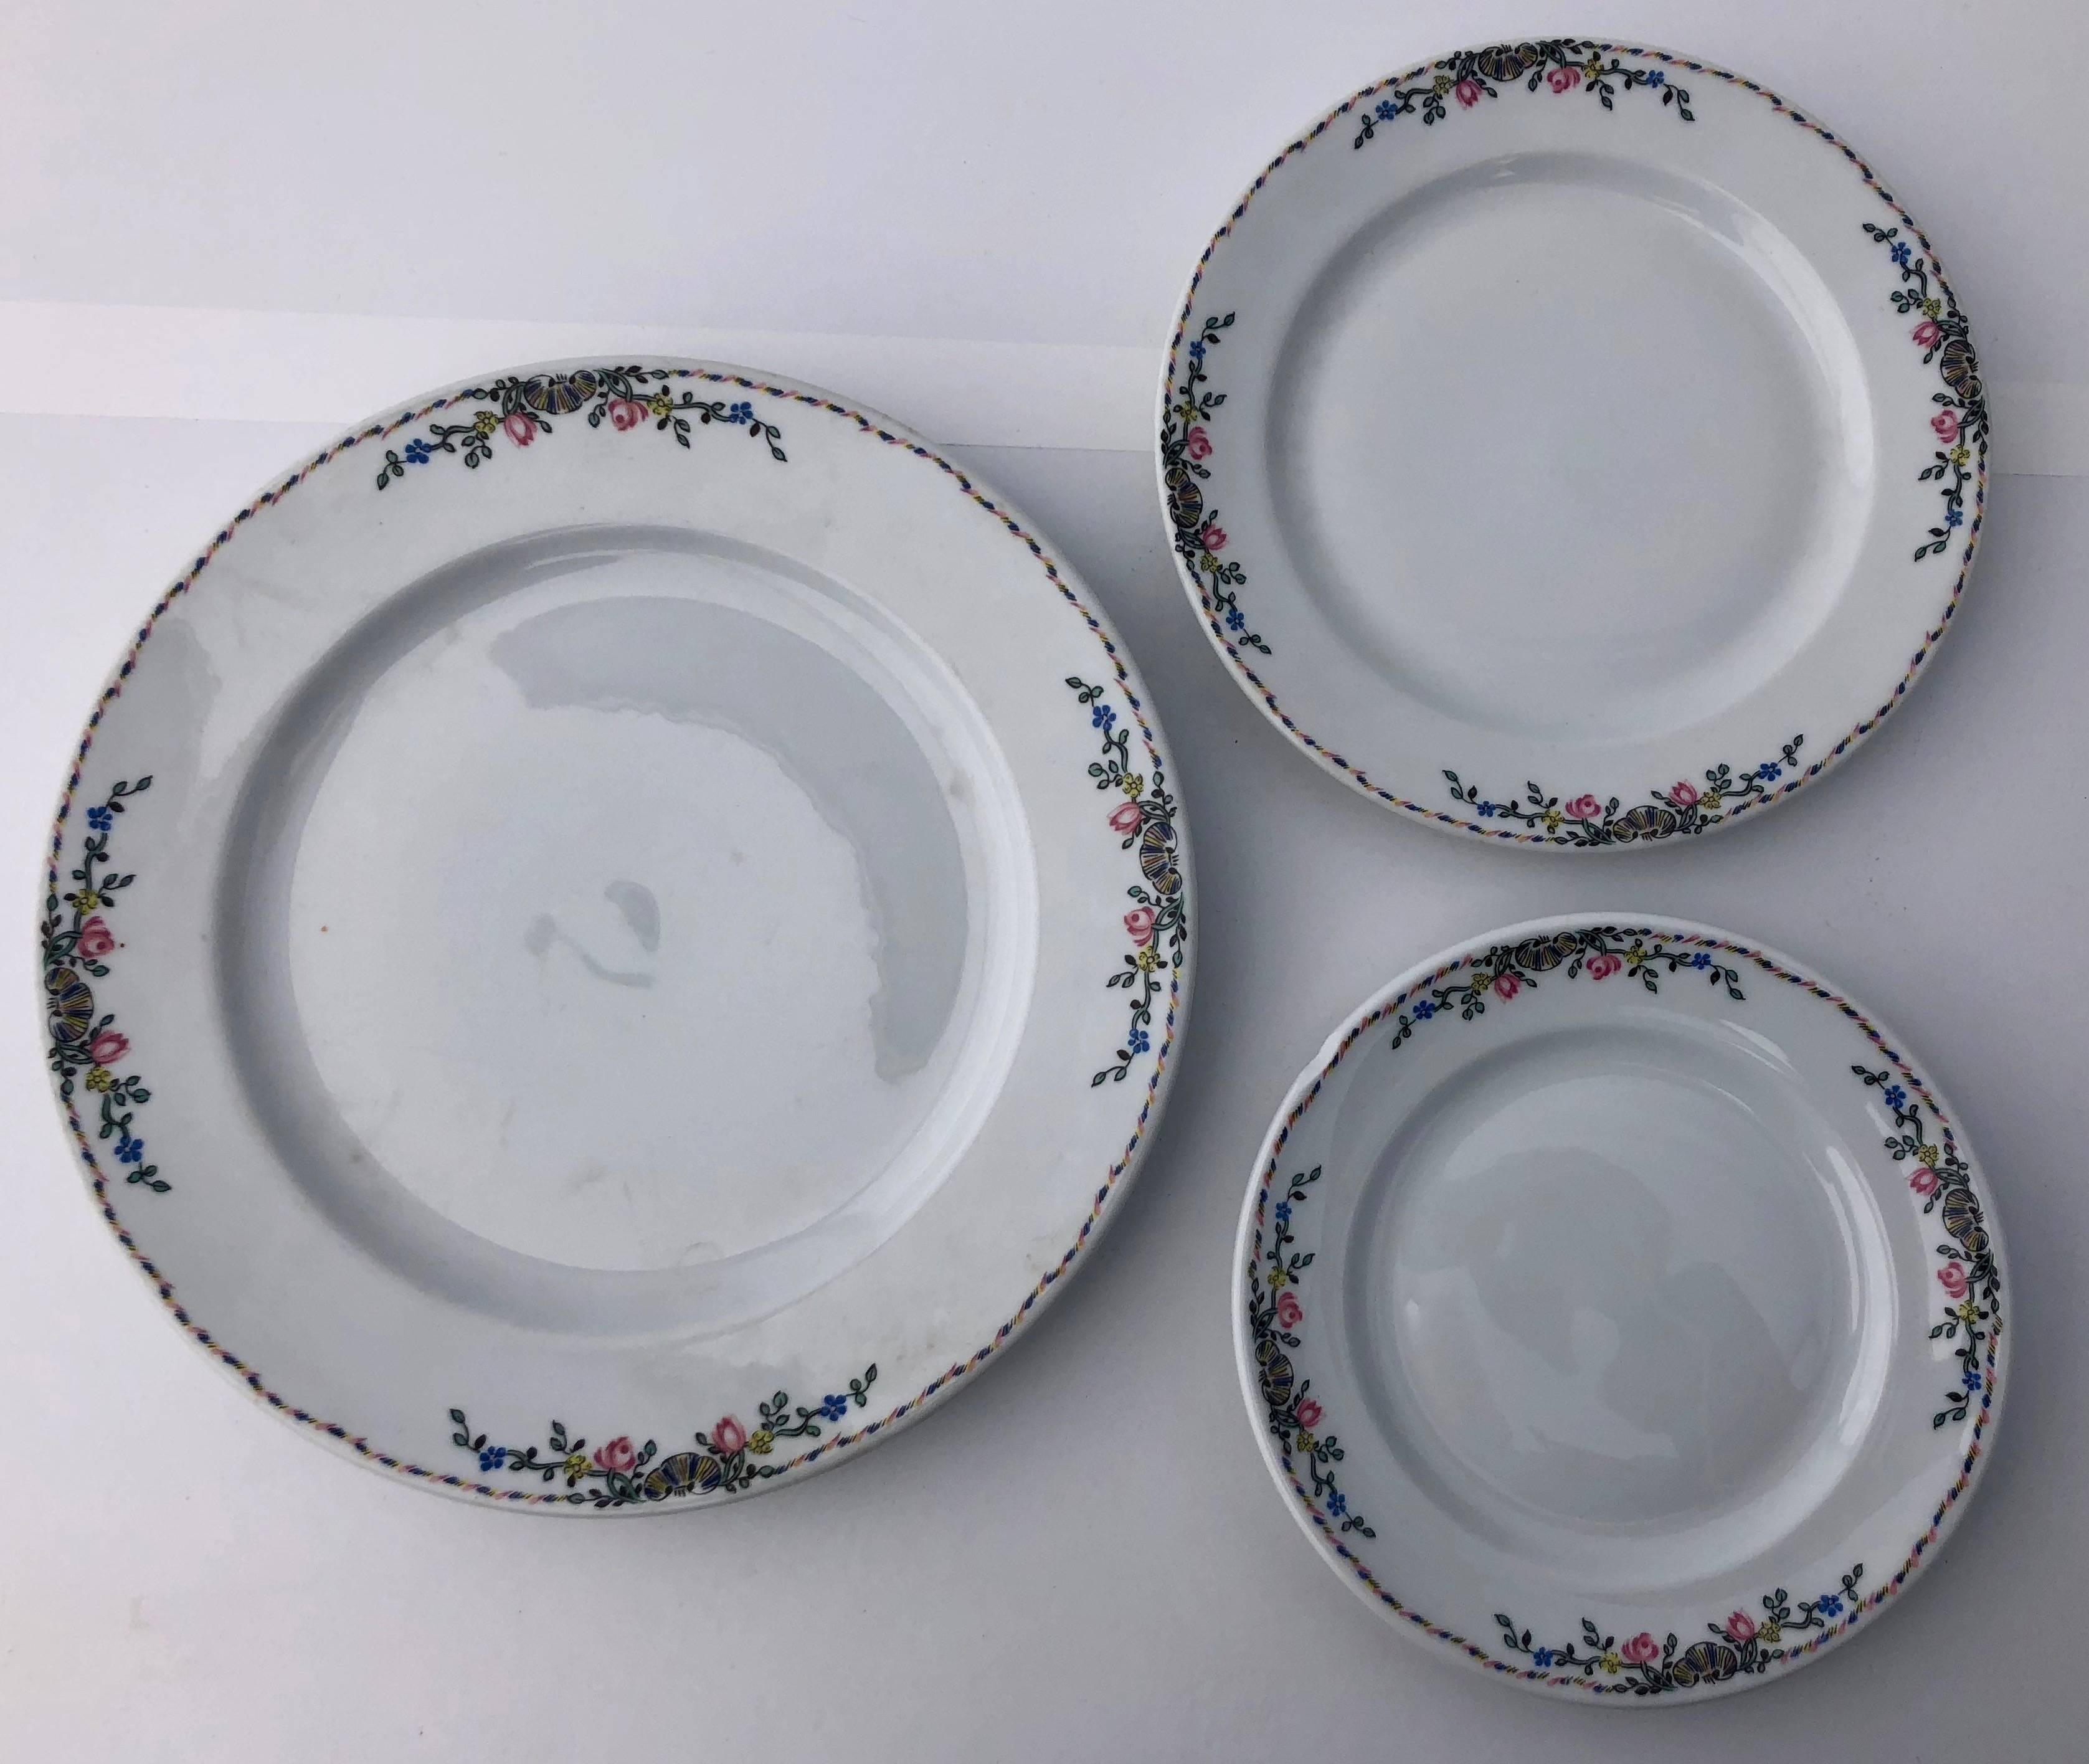 Modern 50 French Professional Grade Limoges Plates, One by Havilland, One by Bernardaud For Sale